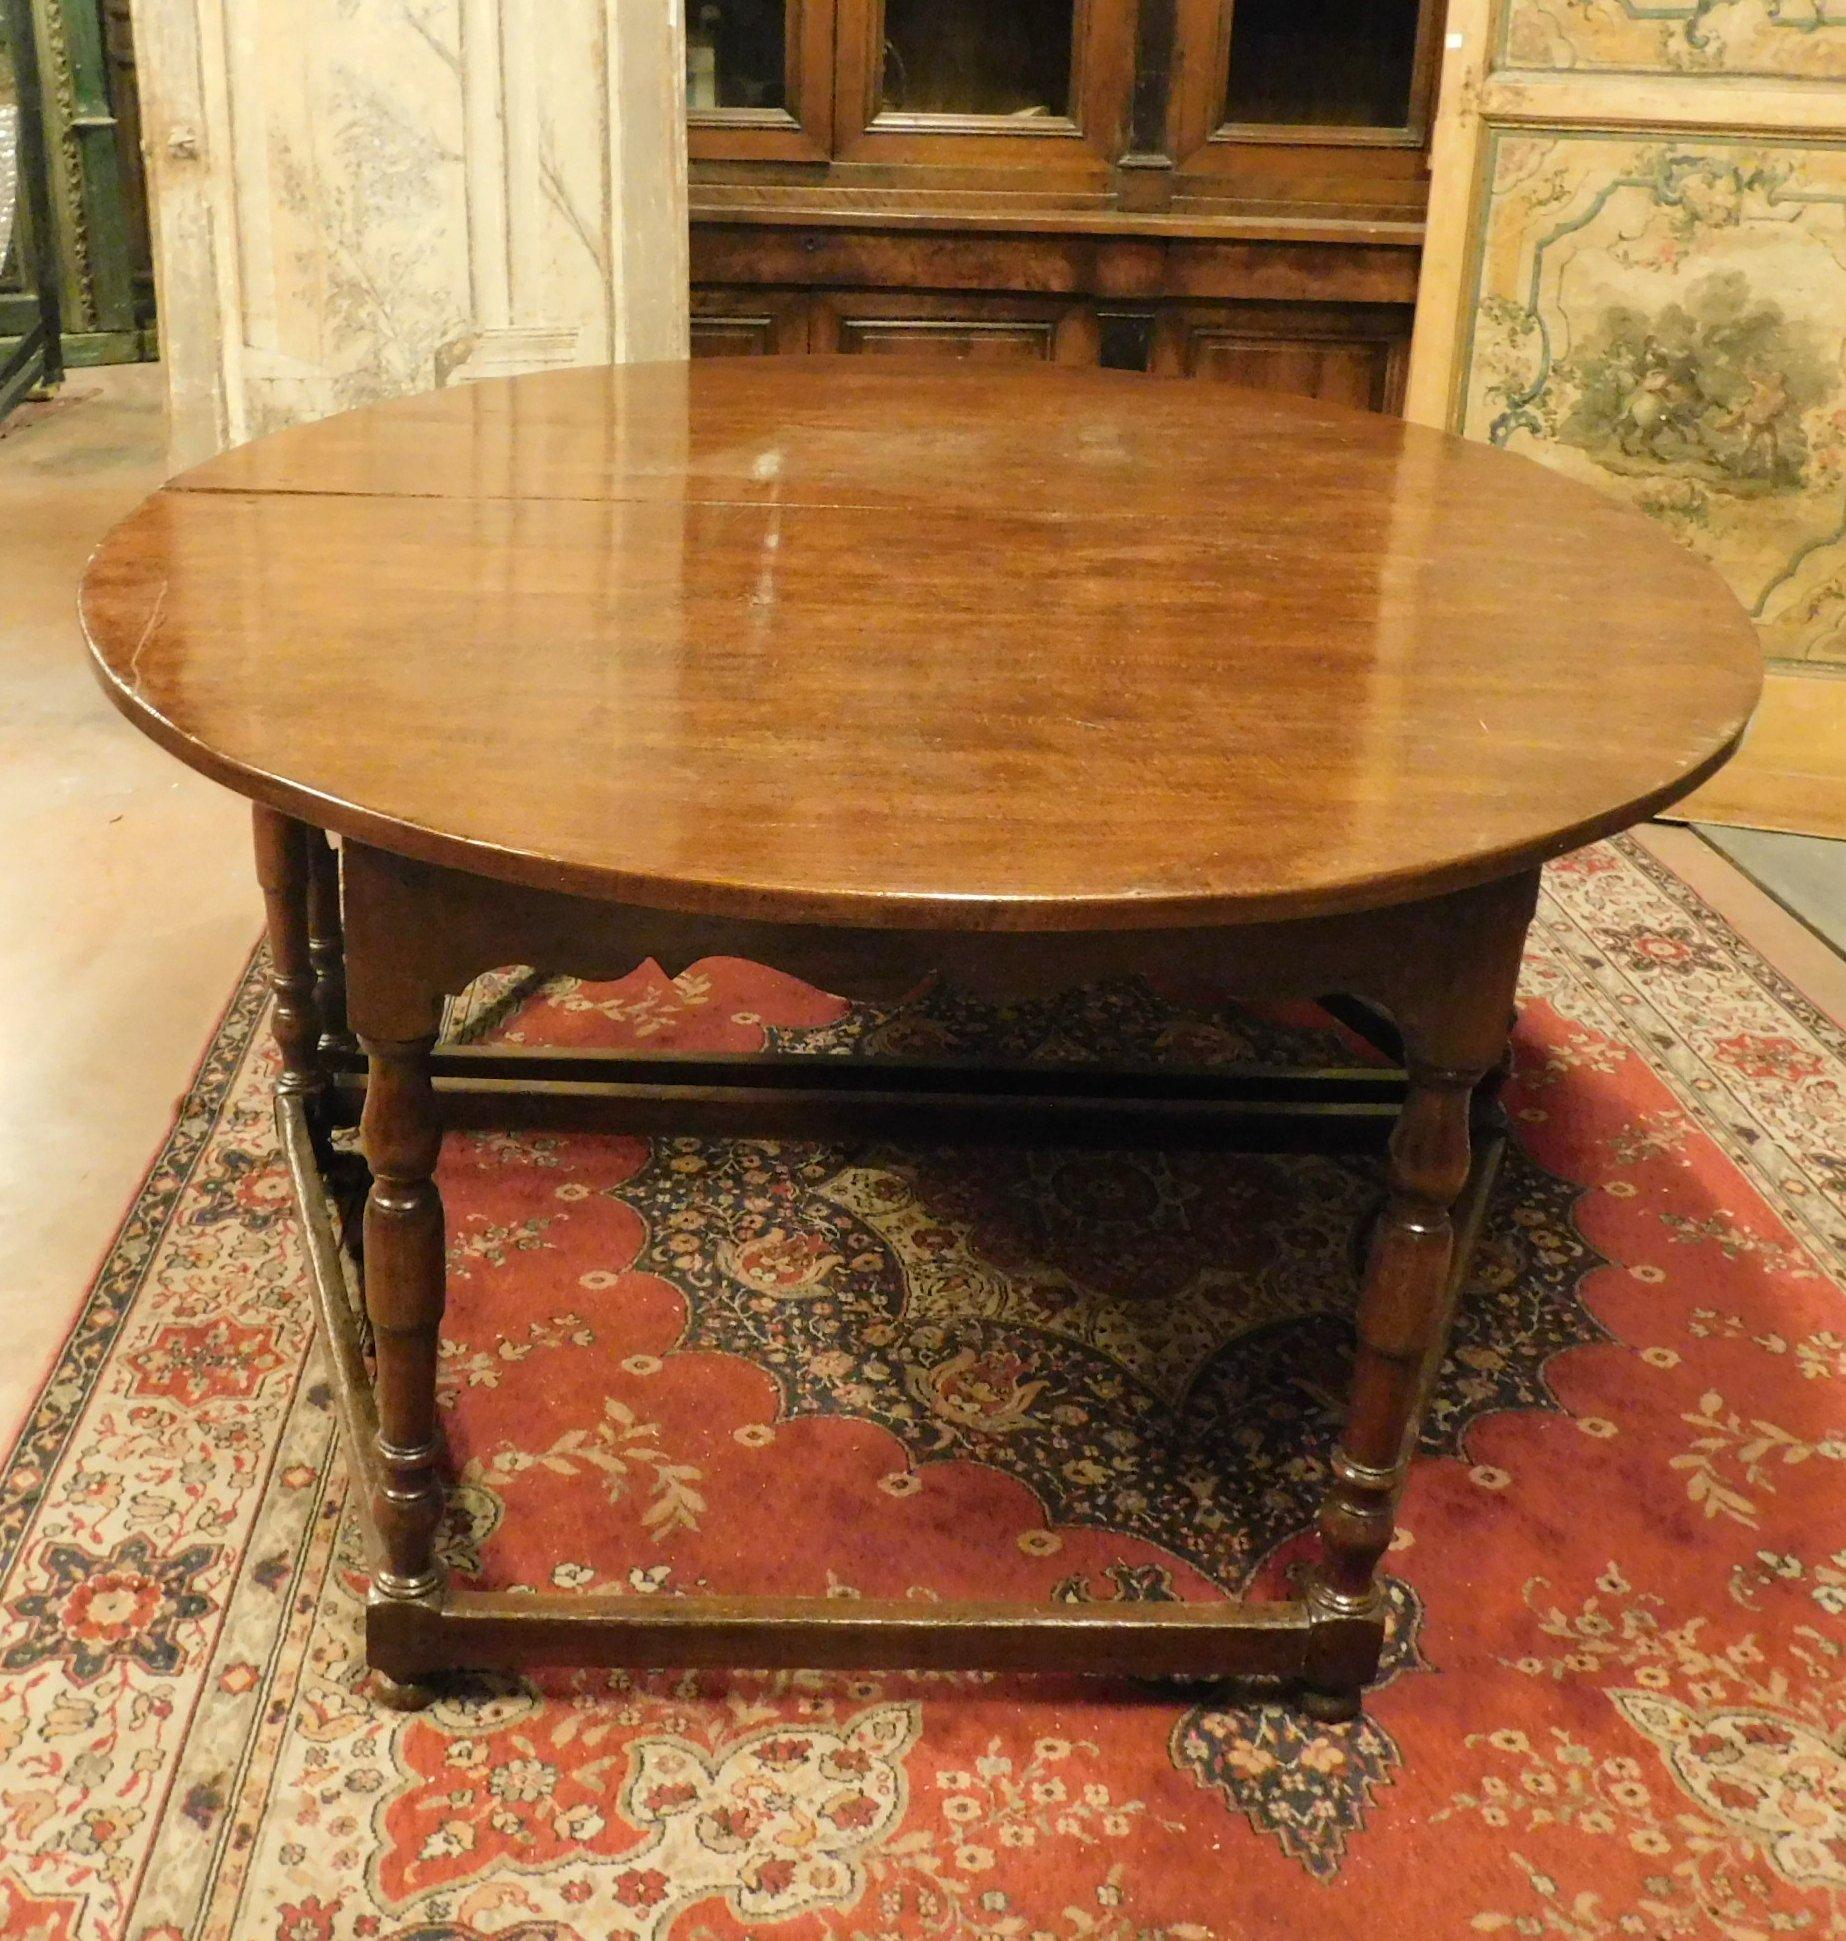 Antique Oval Table in Beechwood, Divisible 2 Half-Moons with 8 Legs, 1600, Italy In Good Condition For Sale In Cuneo, Italy (CN)